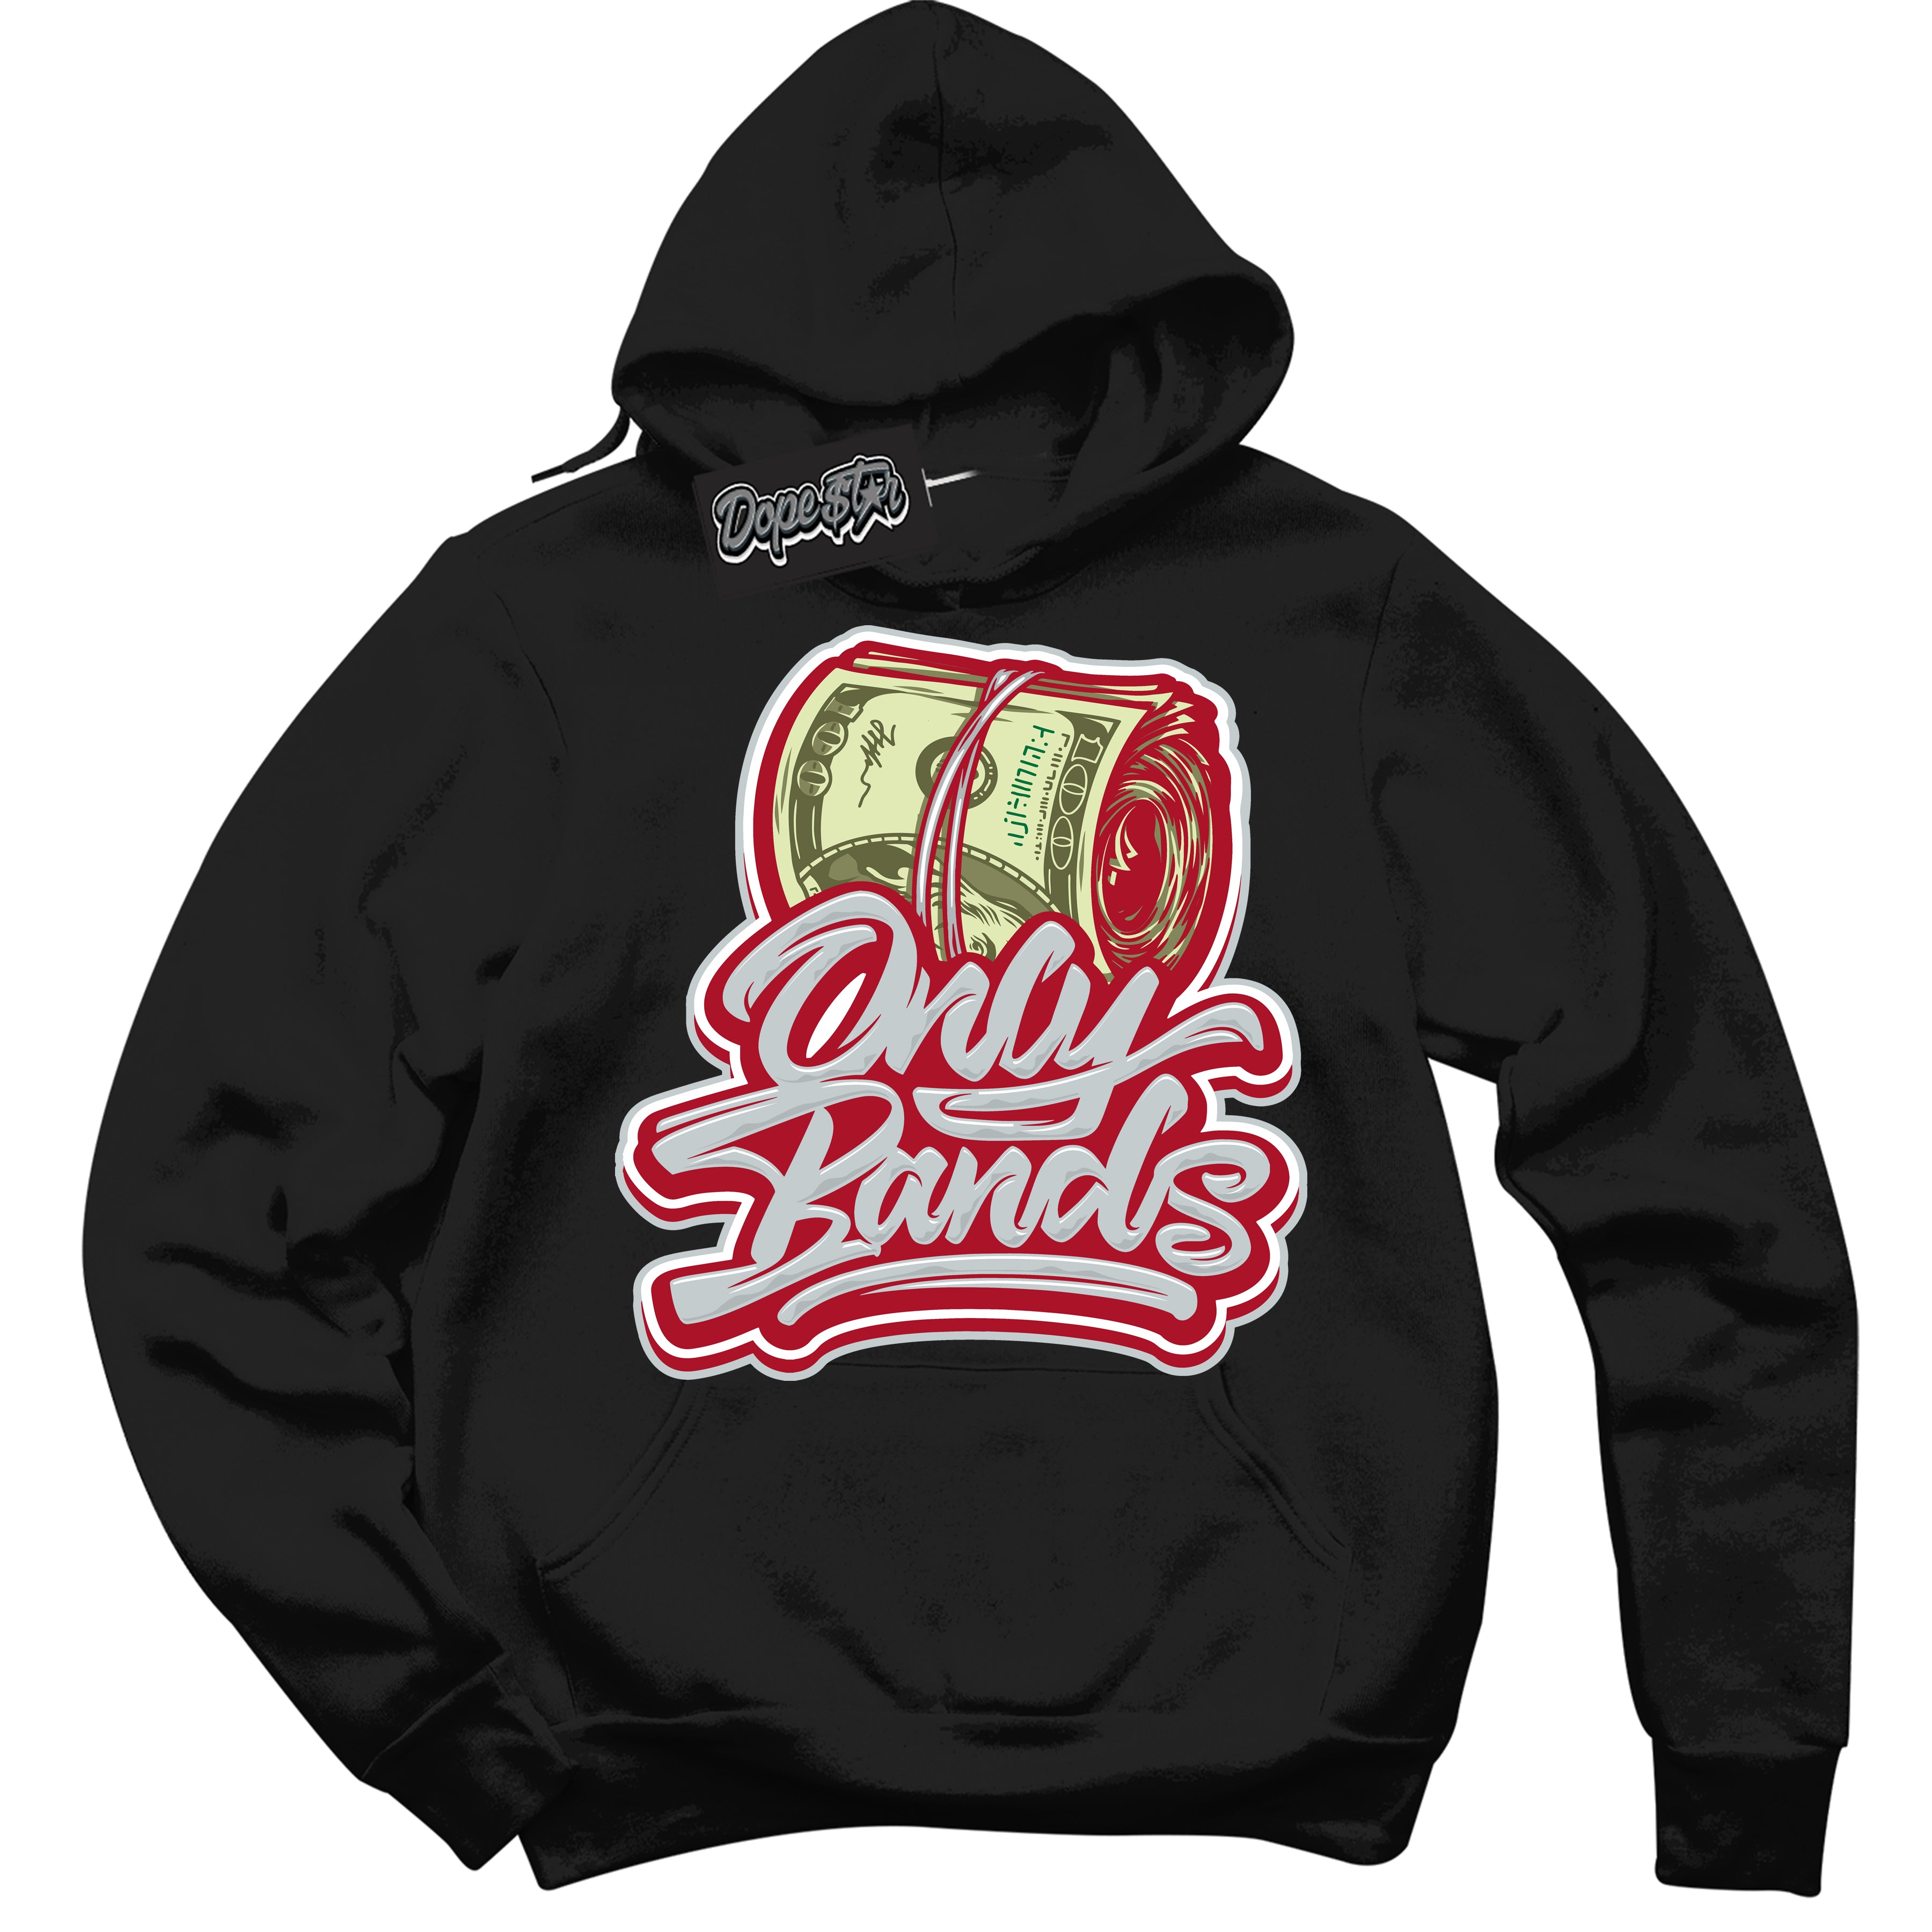 Cool Black Hoodie with “ Only Bands ”  design that Perfectly Matches  Reverse Ultraman Sneakers.